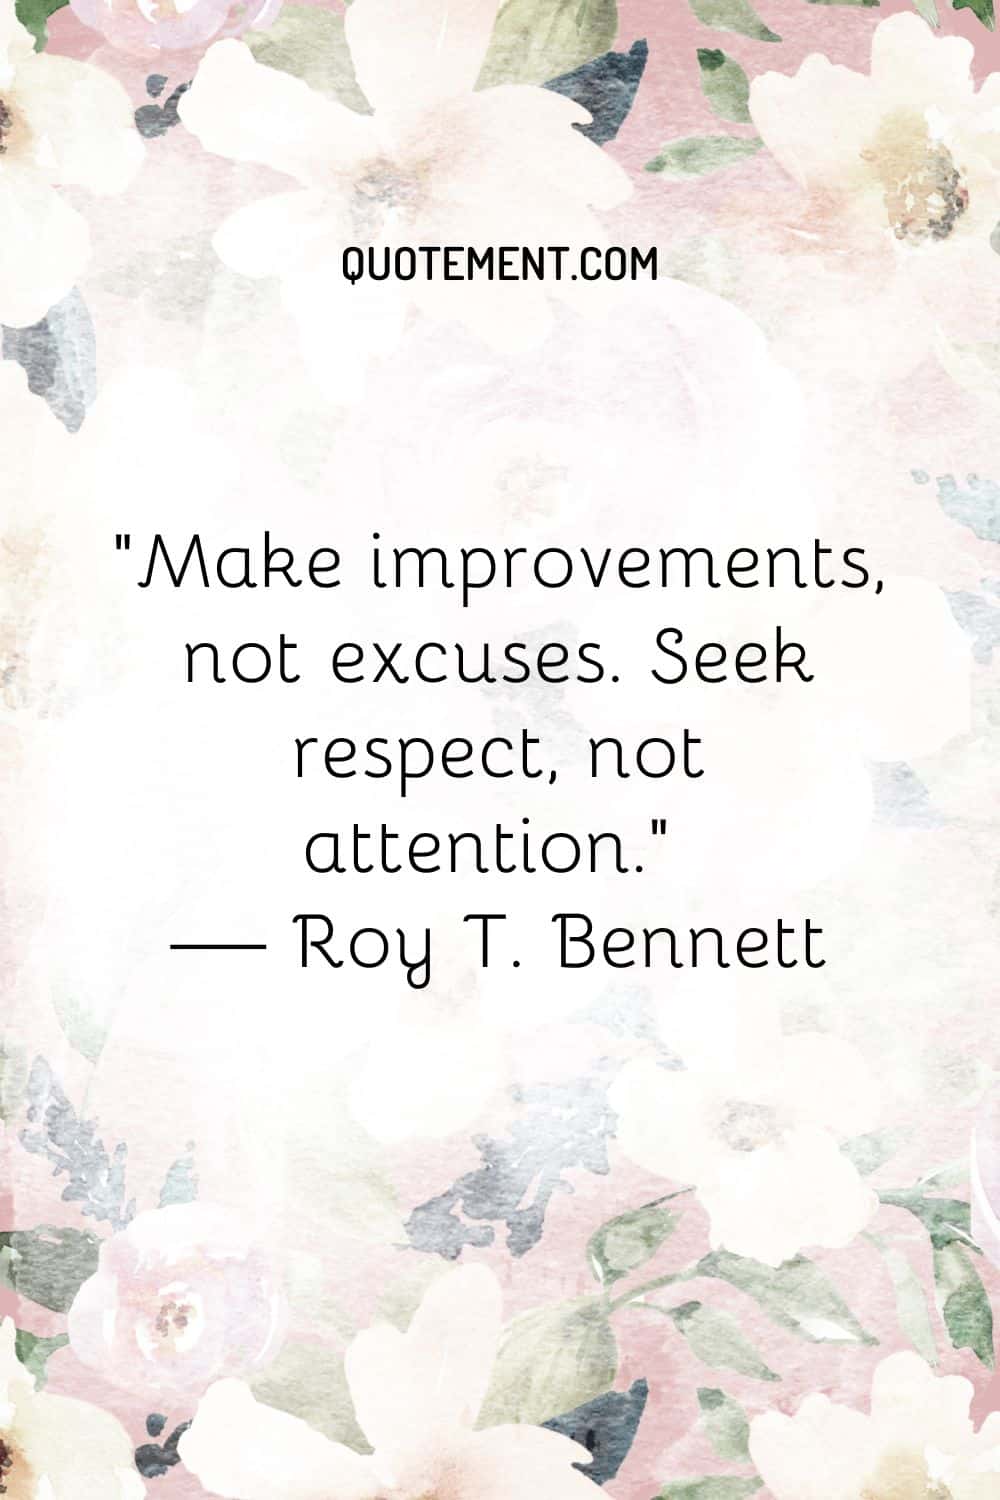 Make improvements, not excuses. Seek respect, not attention